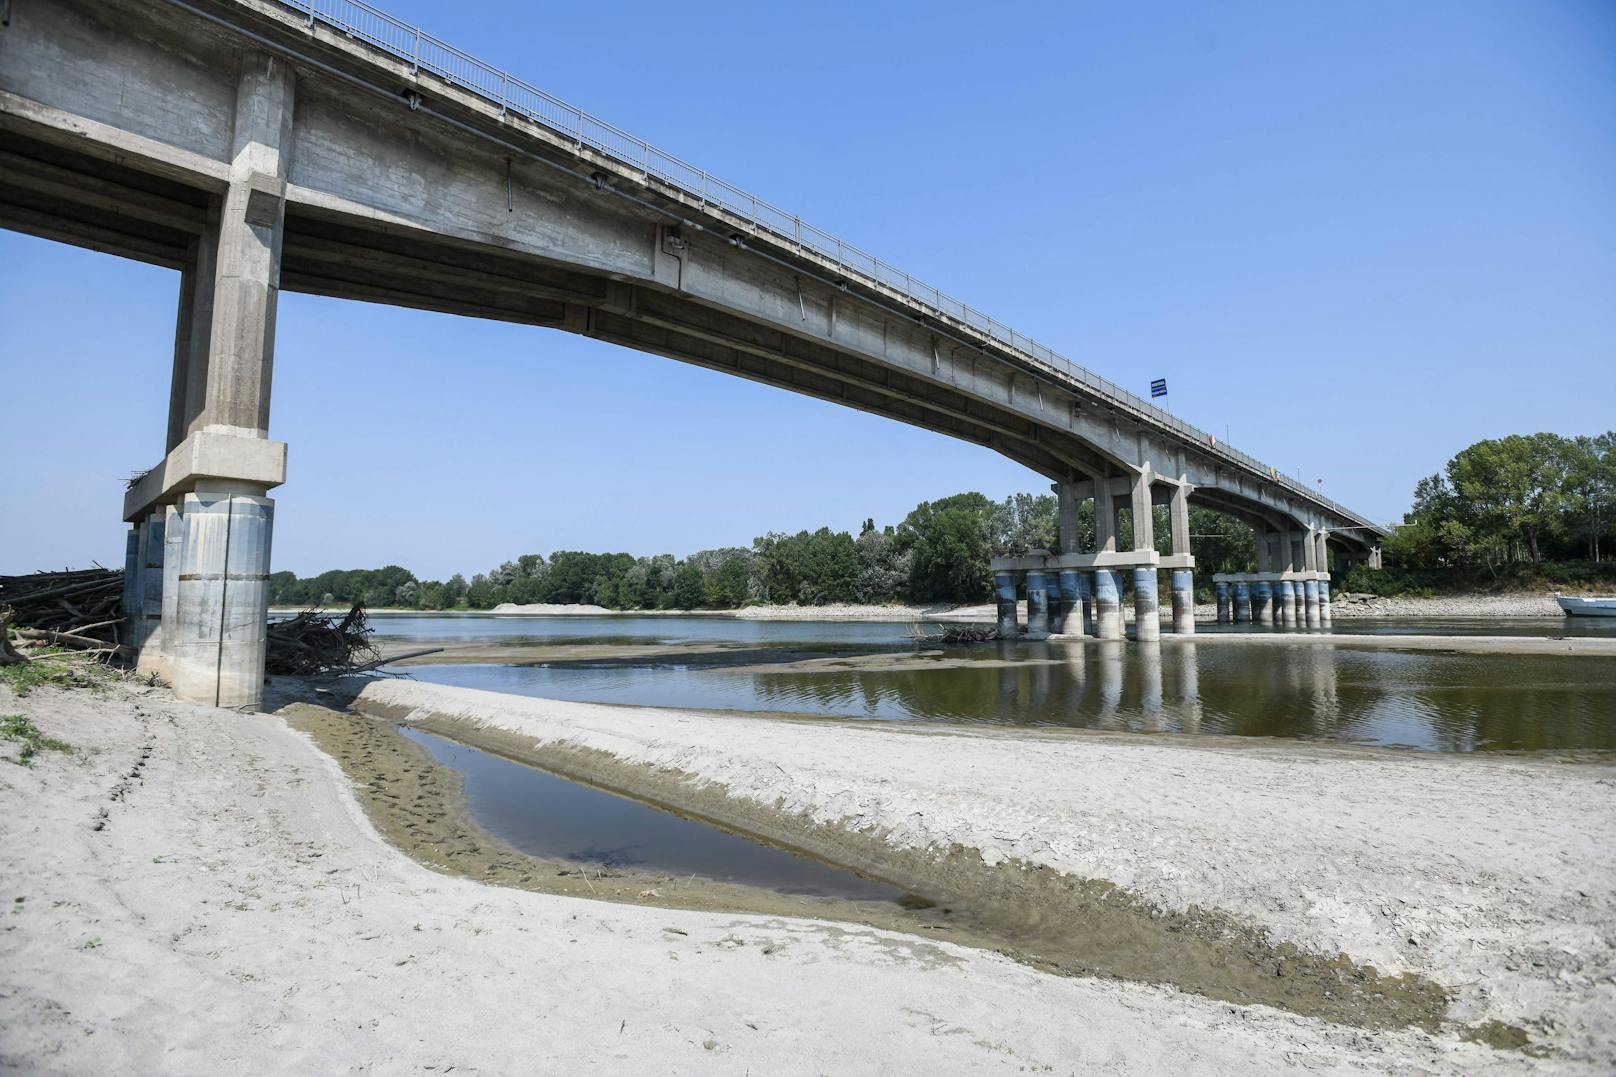 Download von www.picturedesk.com am 19.06.2022 (15:39). 
A view shows the dessicated bed of the river Po in Boretto, northeast of Parma, on June 15, 2022. - According to the river observatory, the drought affecting Italy's longest river Po is the worst in the last 70 years. (Photo by Piero CRUCIATTI / AFP) - 20220615_PD4360 - Rechteinfo: Rights Managed (RM) Nur für redaktionelle Nutzung! Werbliche Nutzung erfordert Freigabe: bitte schicken Sie uns eine Anfrage.